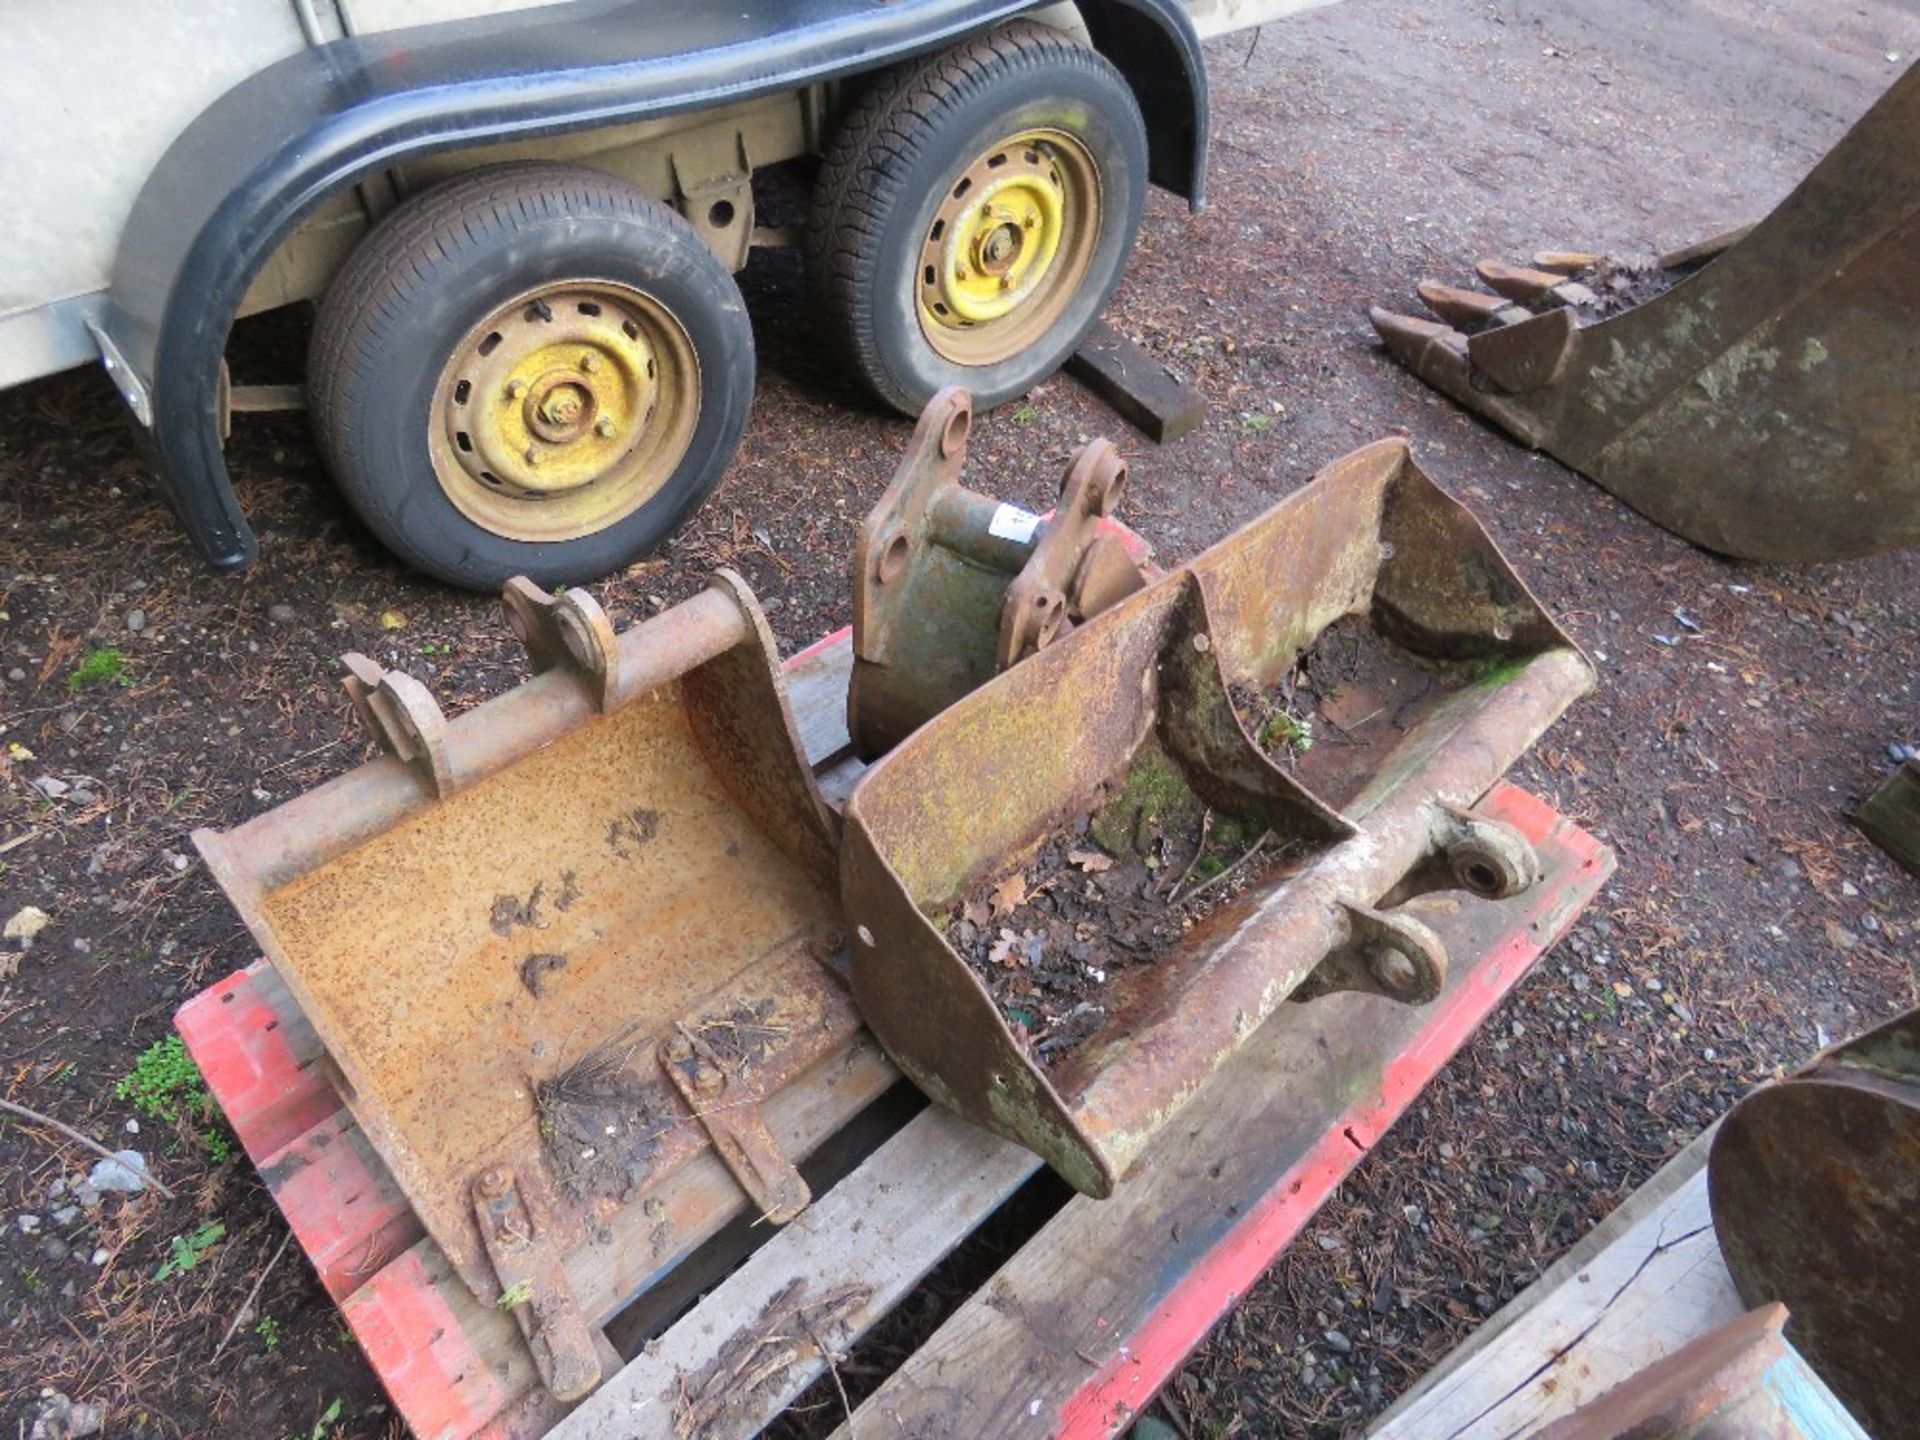 3 X MINI EXCAVATOR DIGGER BUCKETS, 30MM PINS APPROX. - Image 2 of 2